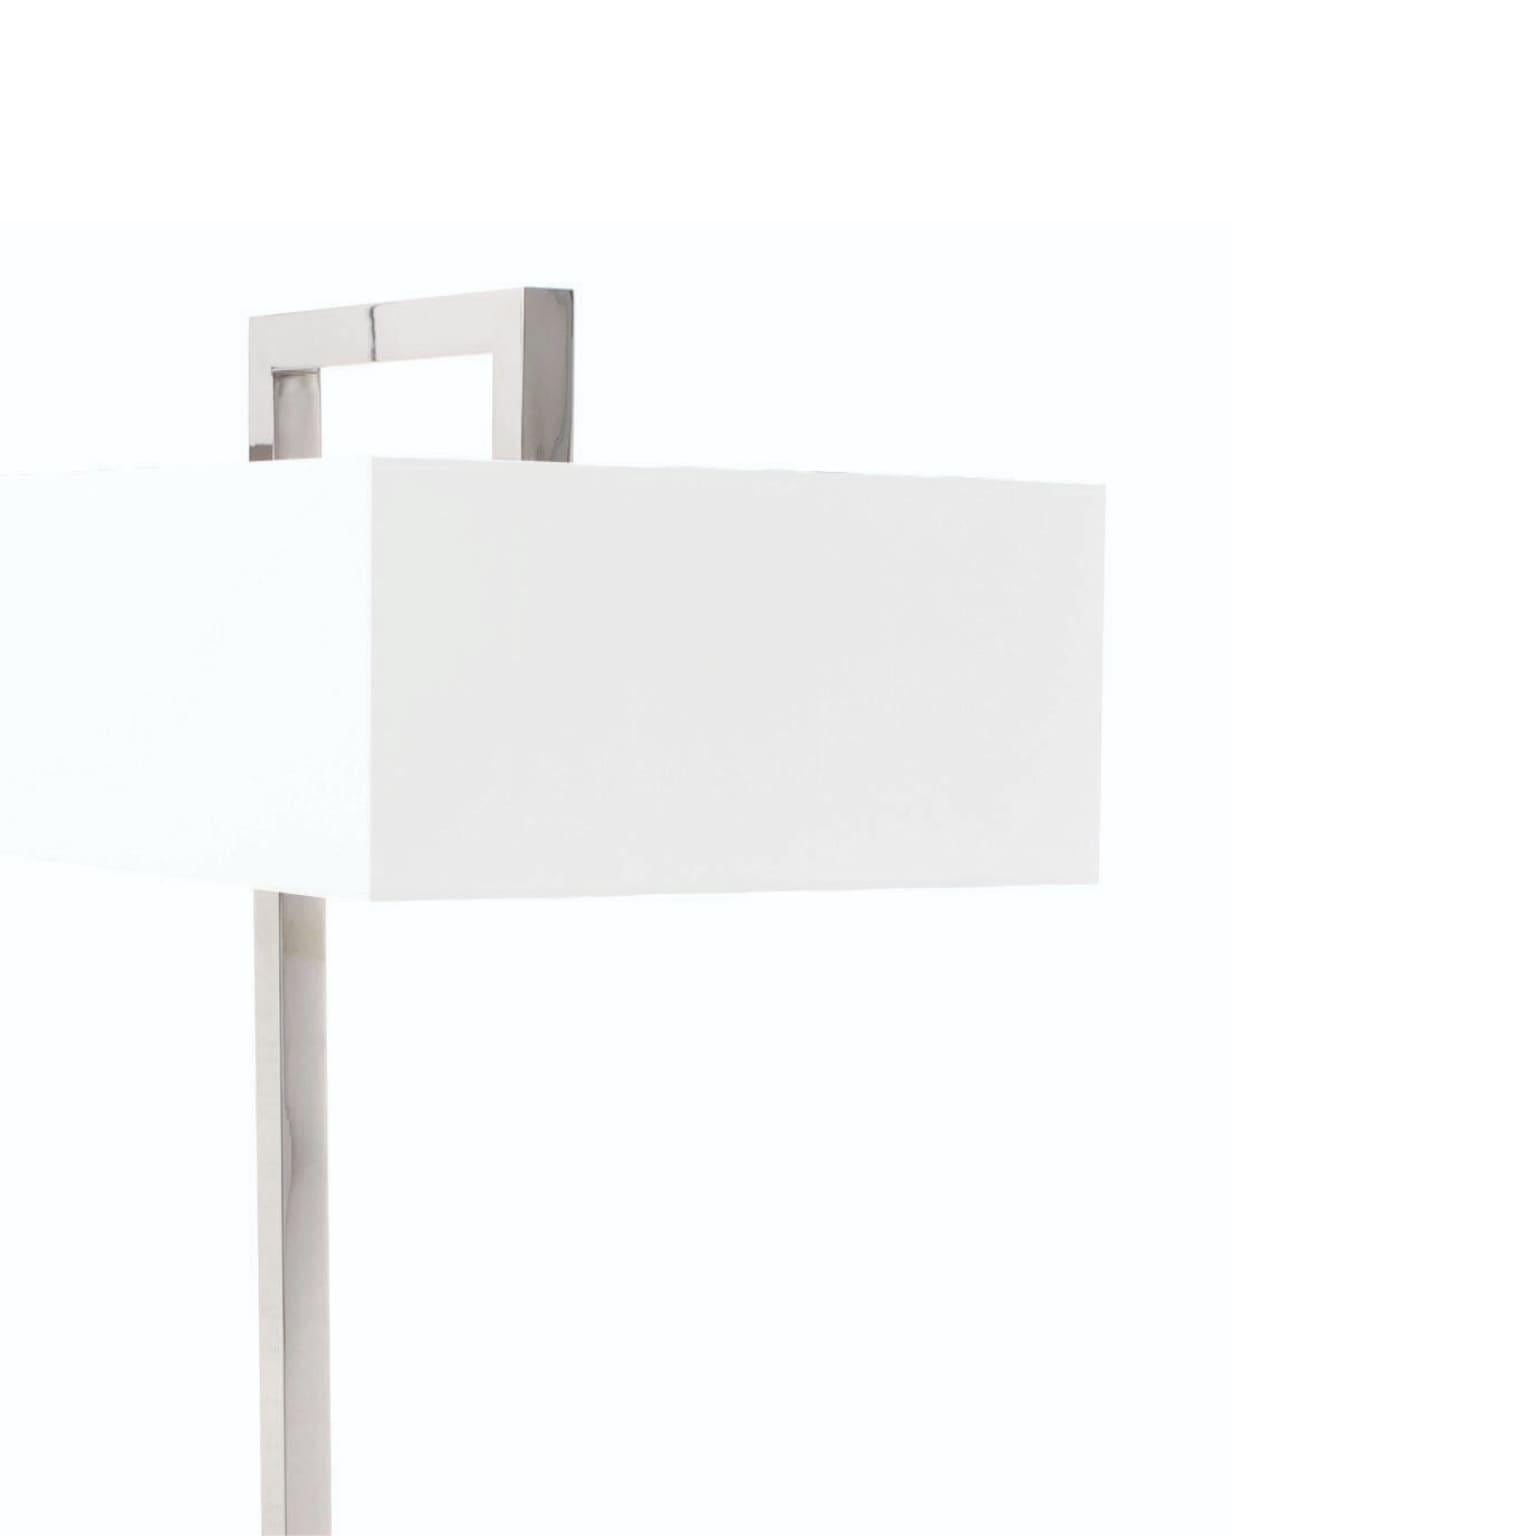 Minimalist Espresso Silk Floor Lamp by Caffe Latte

This Minimalist Espresso Silk Floor Lamp by Caffe Latte has an extremely minimal structure made of stainless steel and a white silk matching square shade. The wide shade is sized to balance its